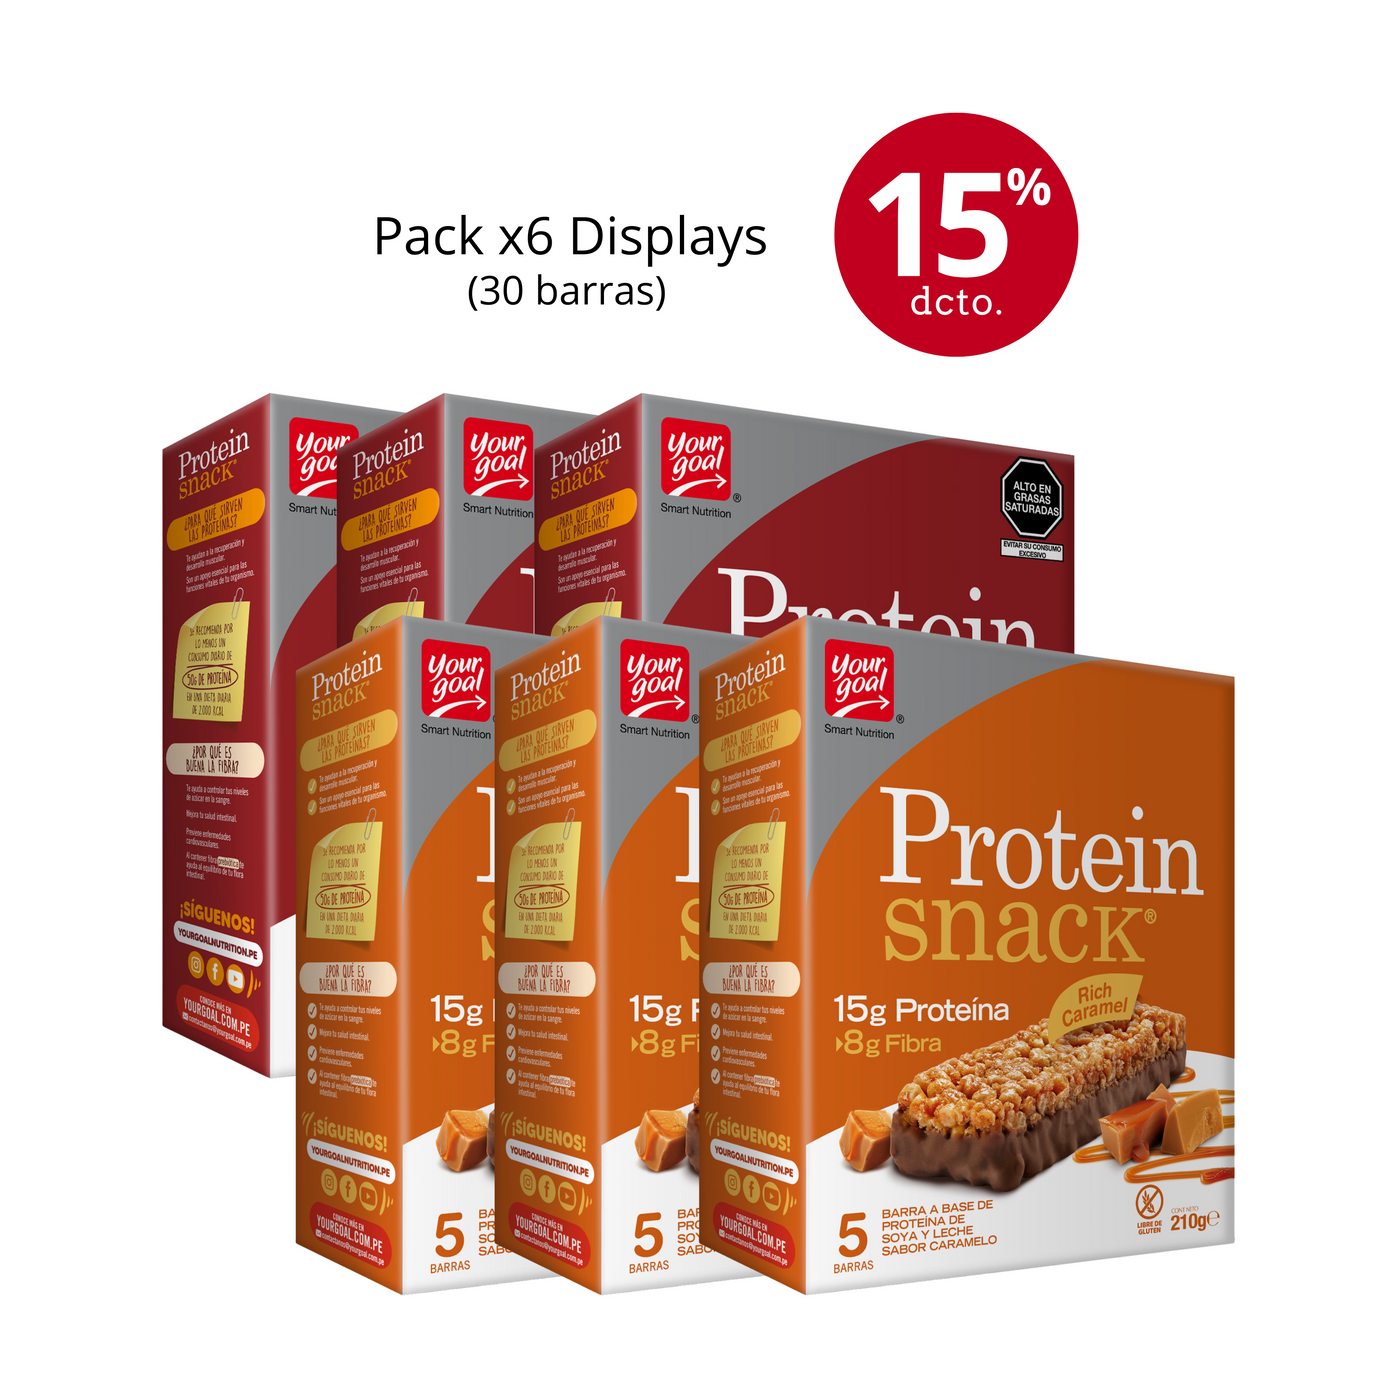 PACK X6 DISPLAYS PROTEIN SNACK (30 BARRAS)